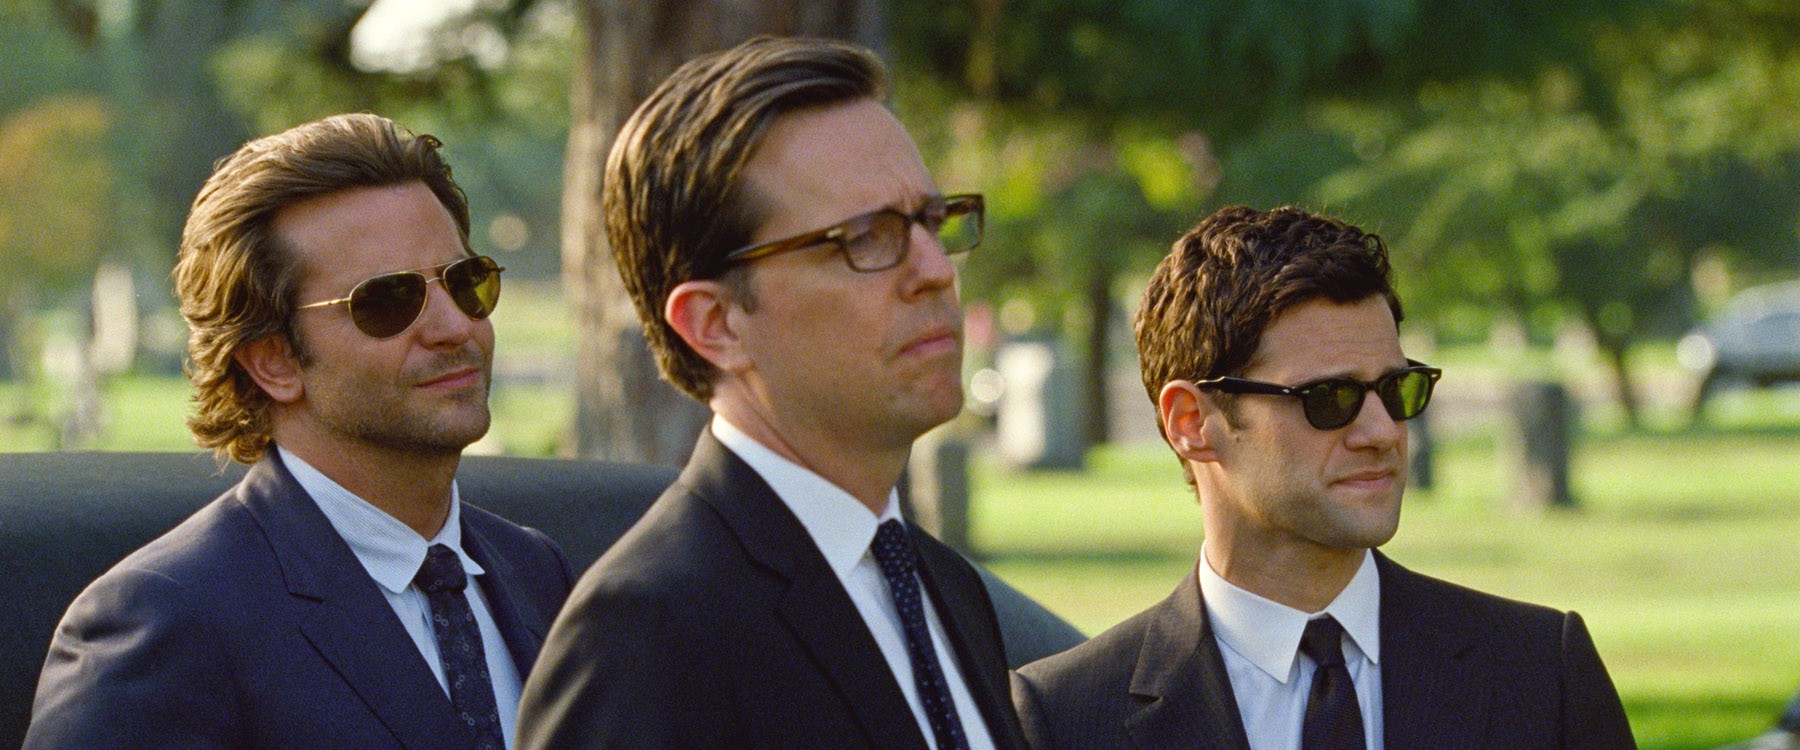 Bradley Cooper, Ed Helms and Justin Bartha in Warner Bros. Pictures' The Hangover Part III (2013)